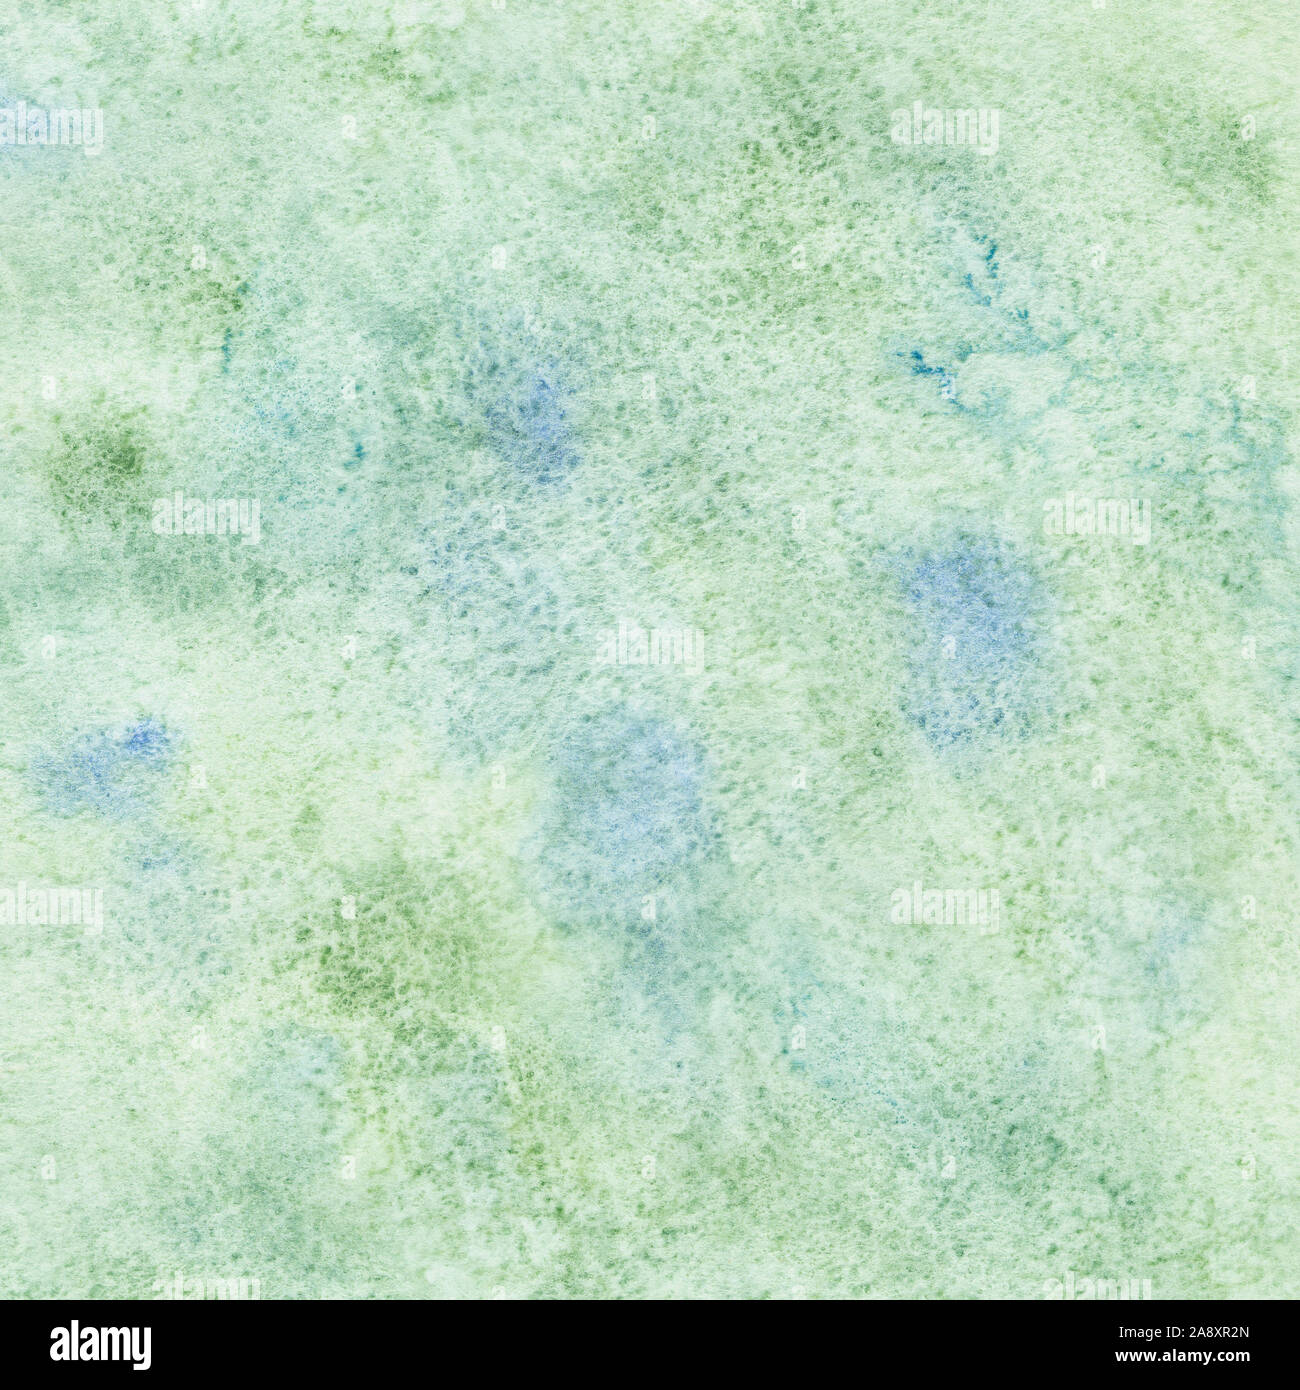 Green-blue watercolor background Stock Photo